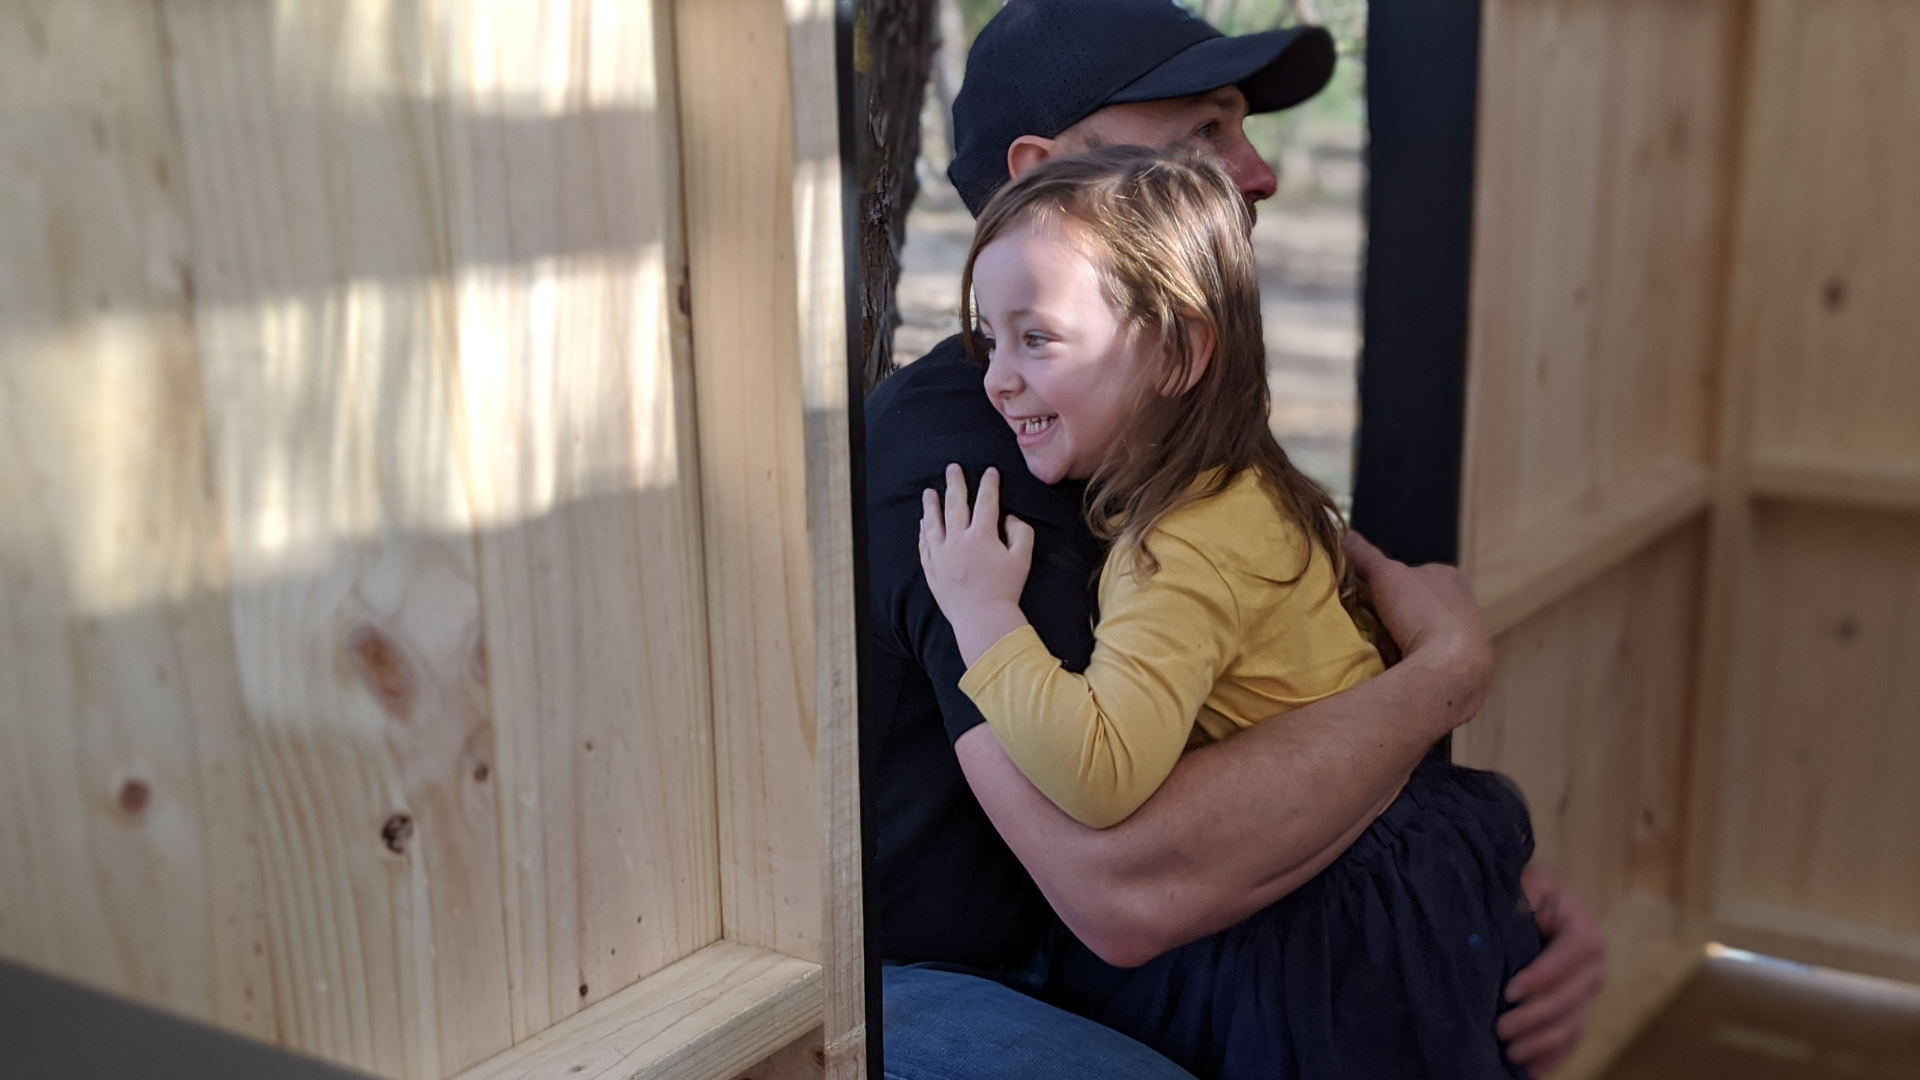 DIY Dad Builds His Daughter Her Dream Cubby House